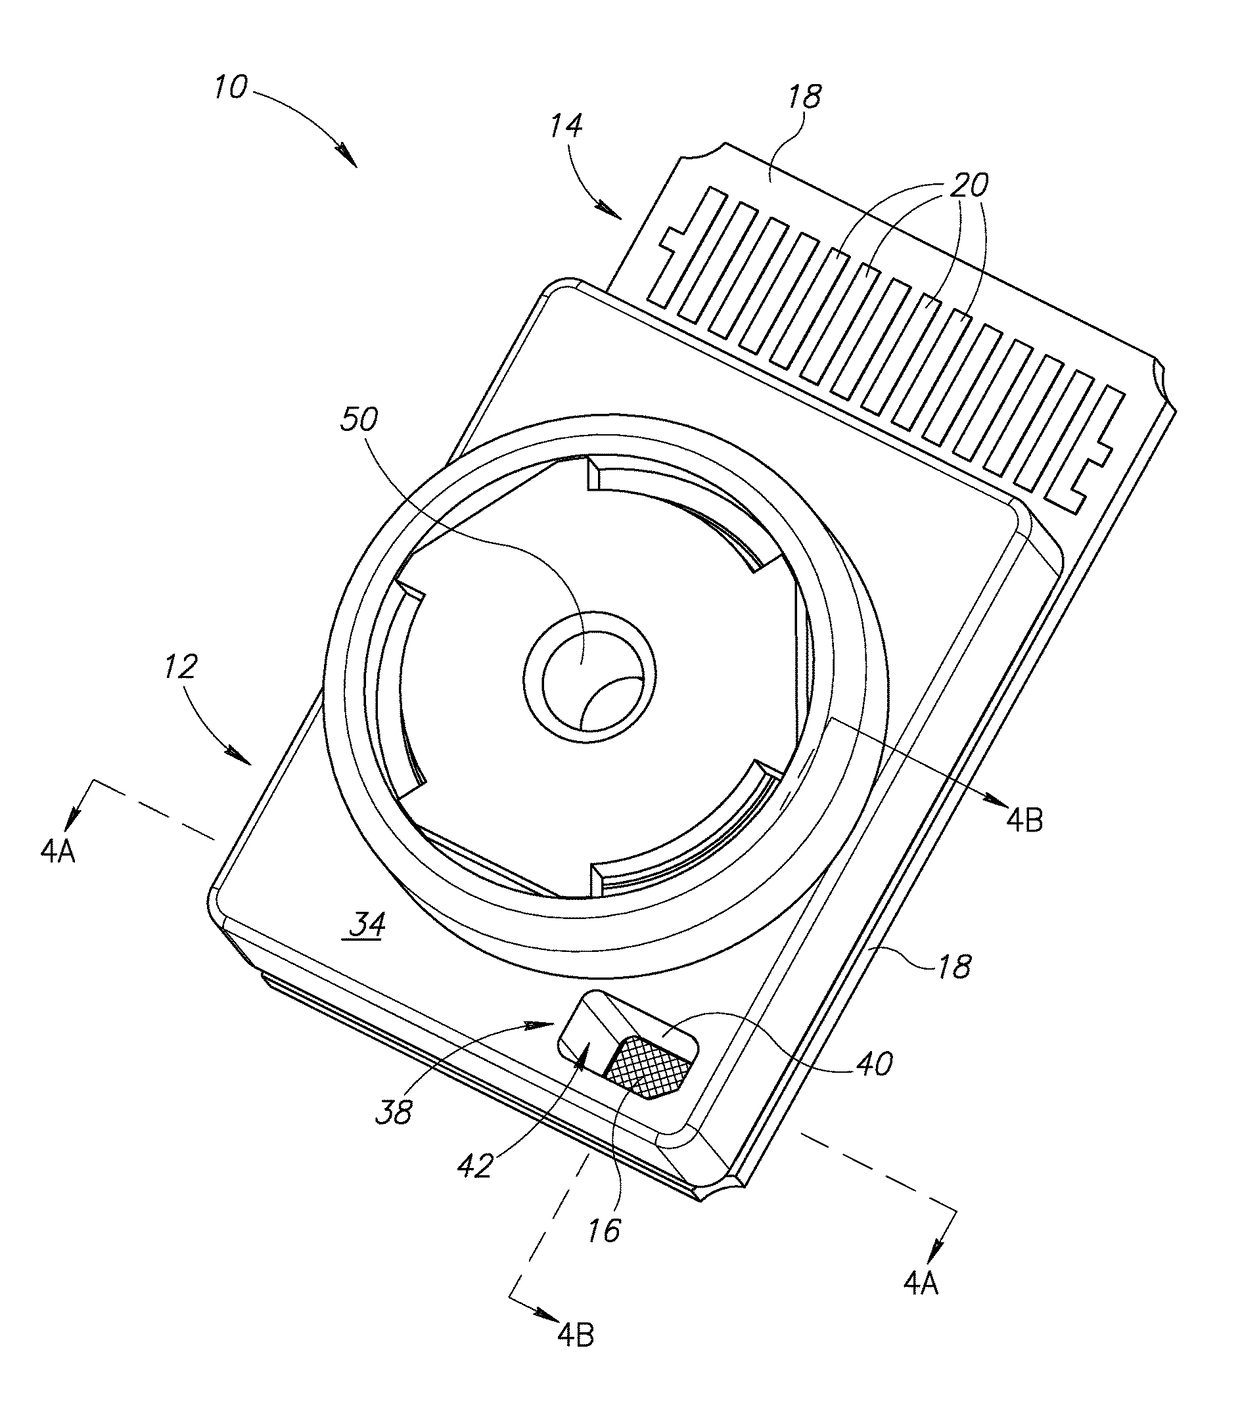 Lens mount with conductive glue pocket for grounding to a circuit board